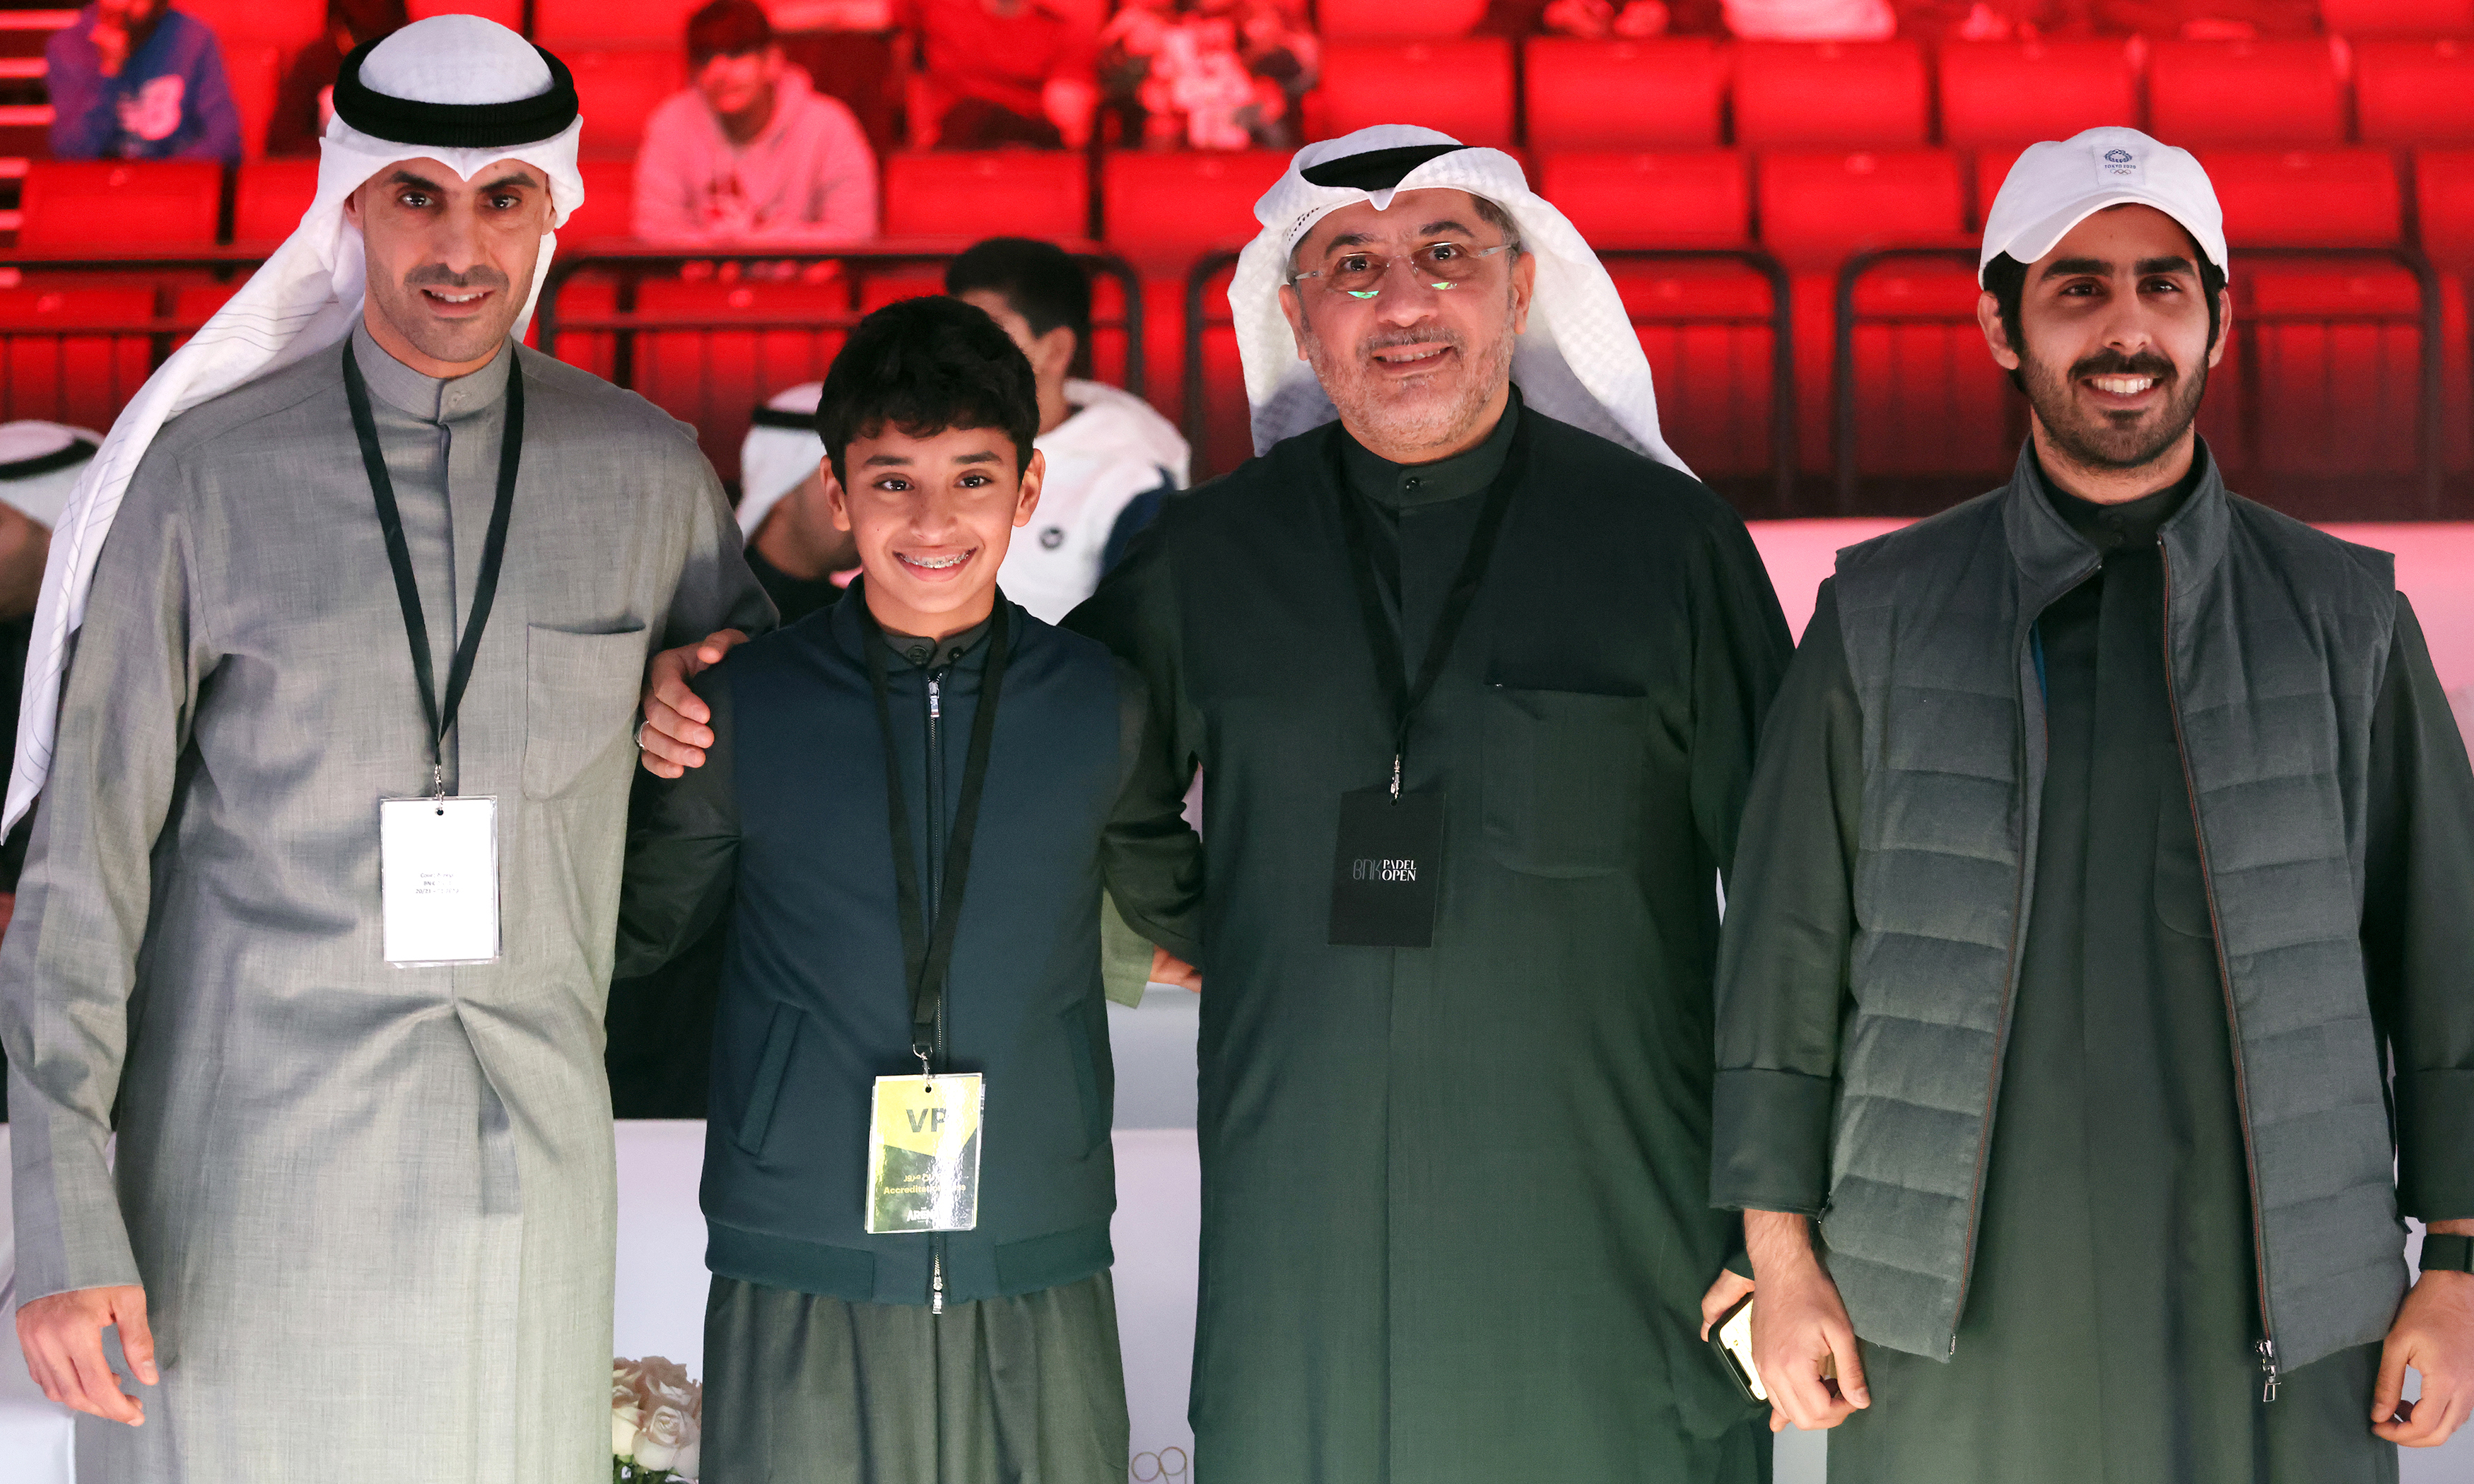 Bader Al-Kharafi and his son Nasser, MP Hani Shams and Member of the board for the Kuwait Olympic Committee Sheikh Jaber Thamer Al-Ahmad